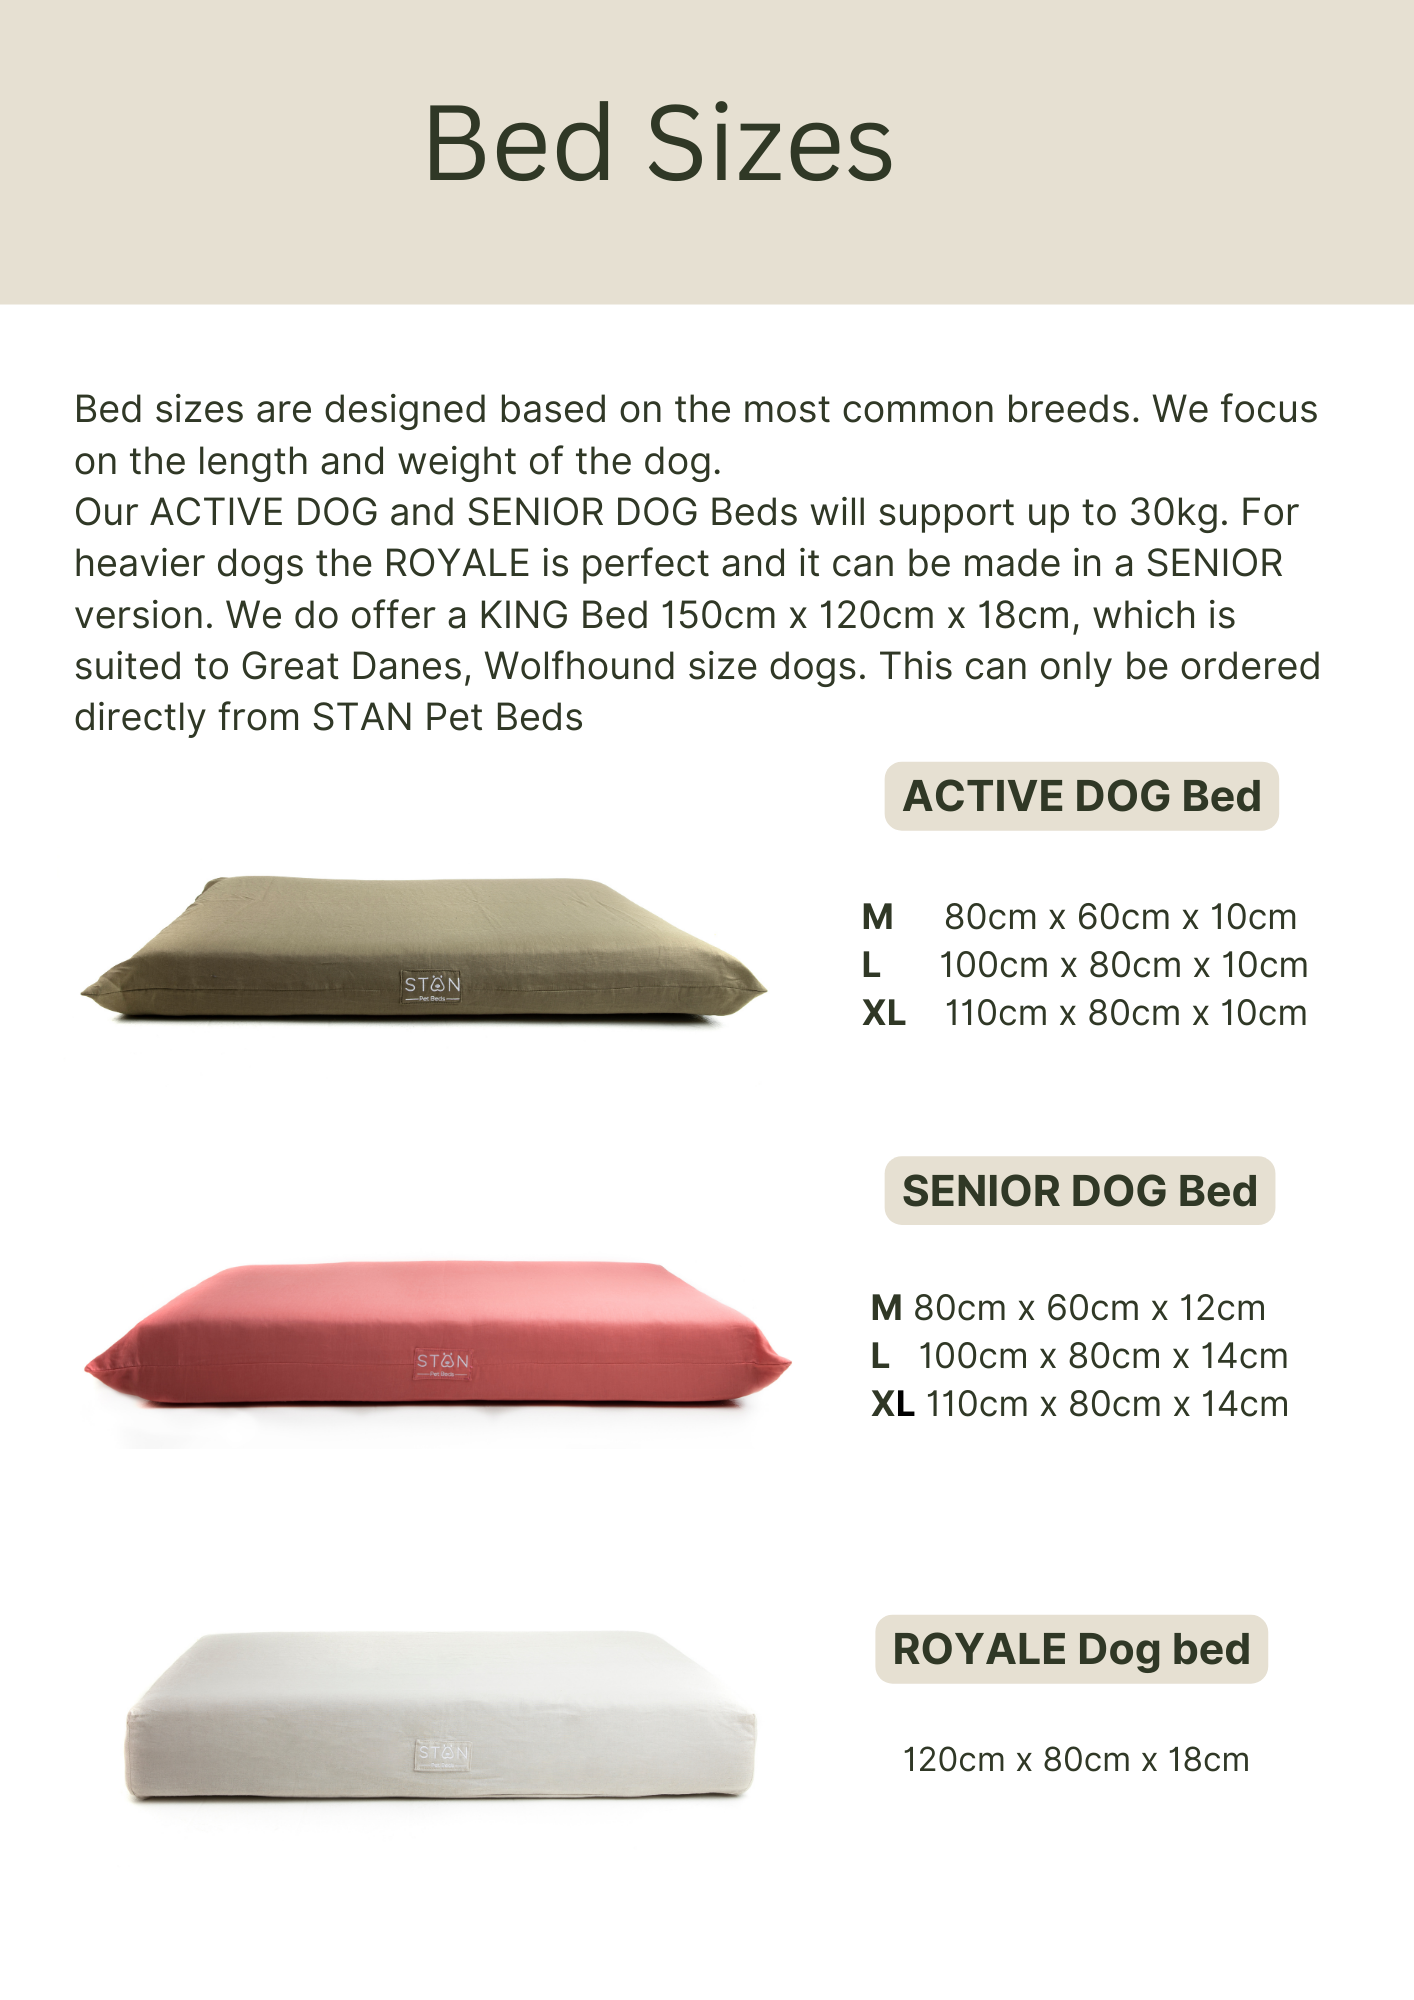 STAN Active Dog Bed in Linen / Grey Marle